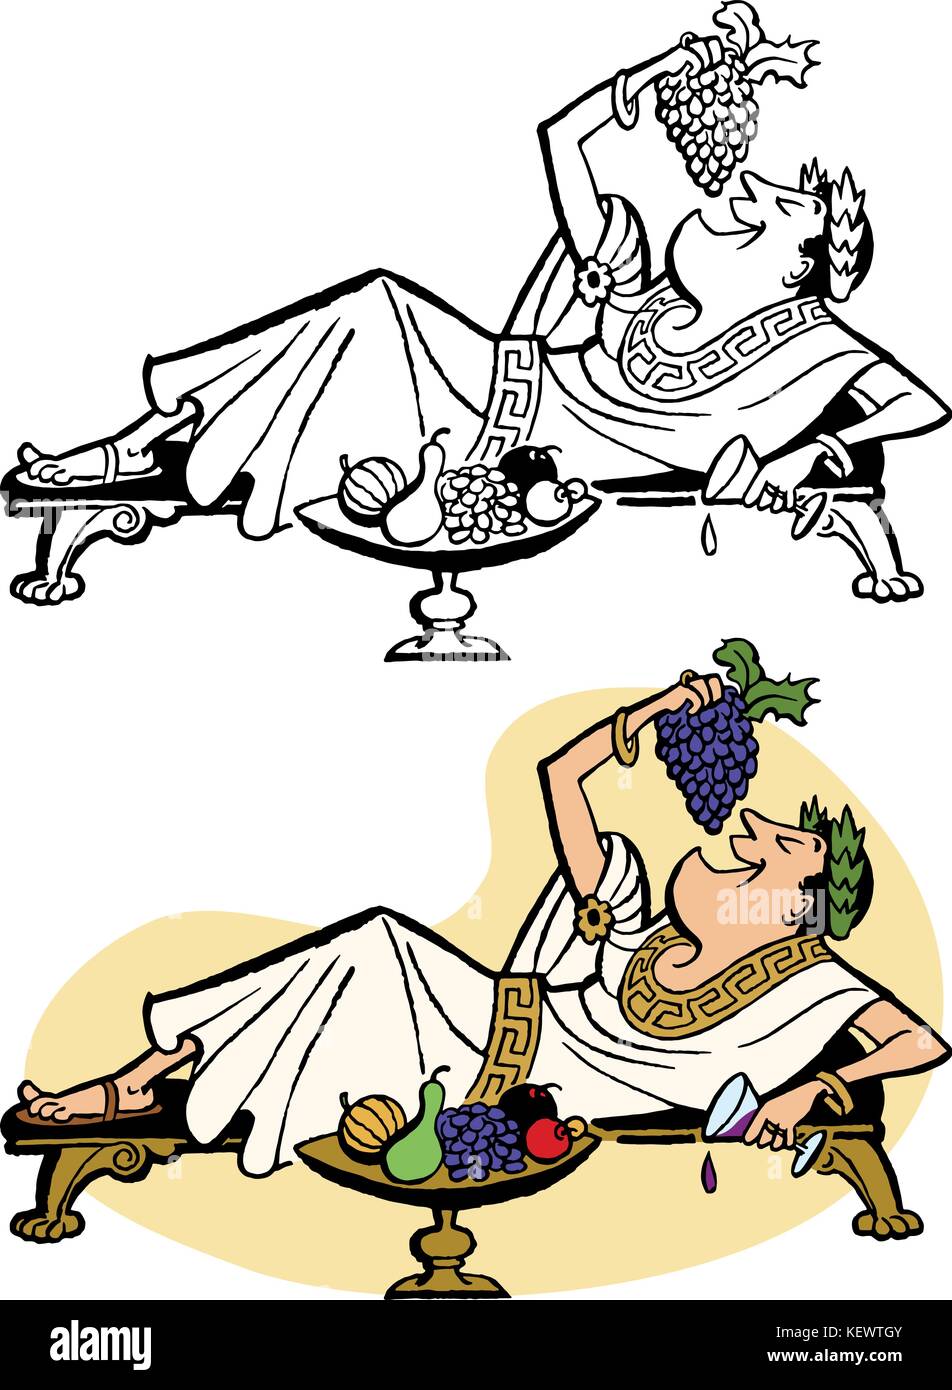 A roman emperor relaxes on a chaise and feeds himself grapes Stock Vector